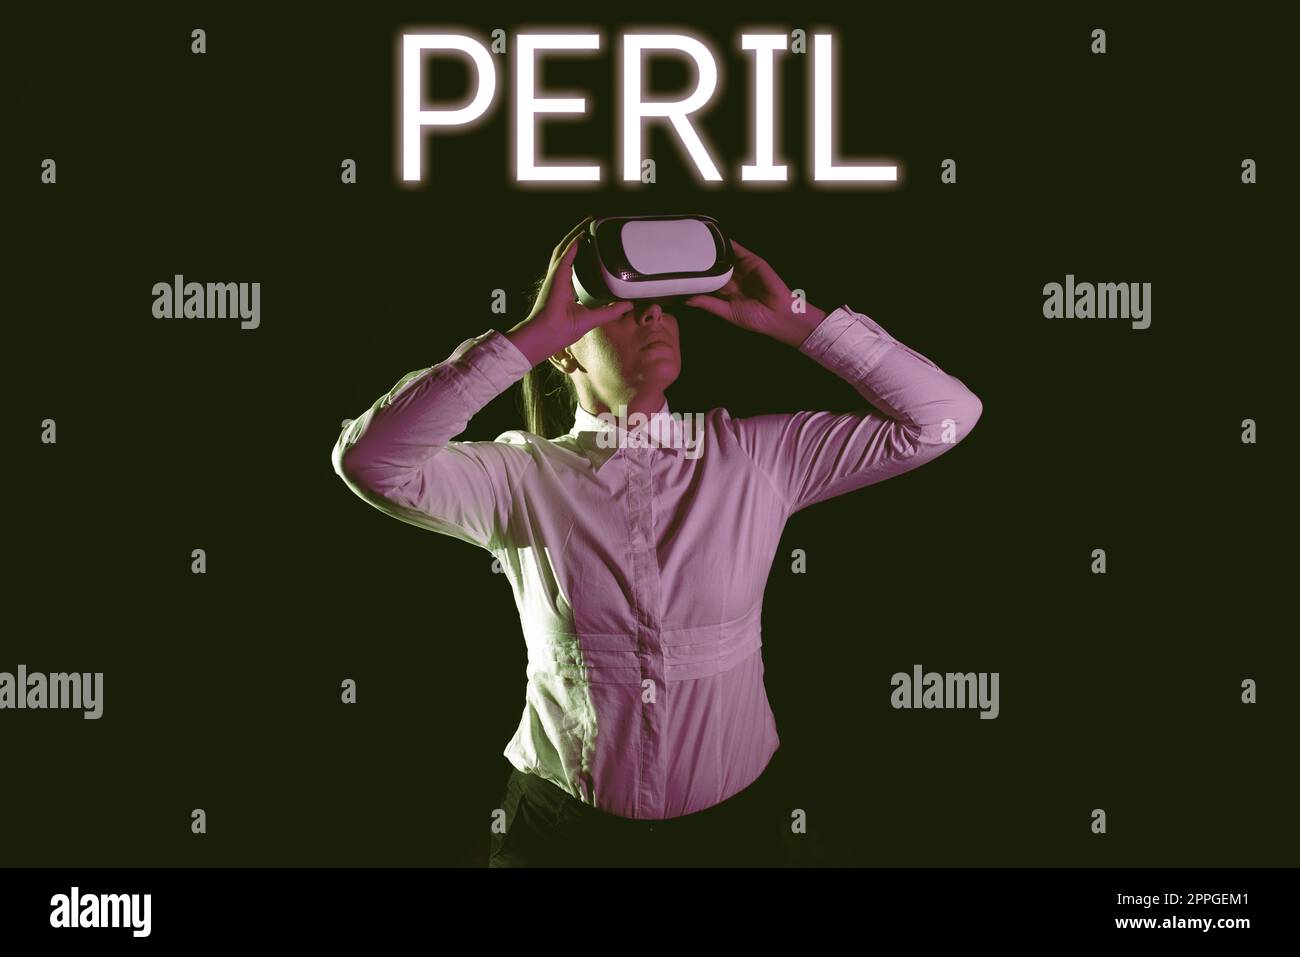 Text showing inspiration Peril. Word for indicates something extremely difficult, dangerous, or hazardous Stock Photo